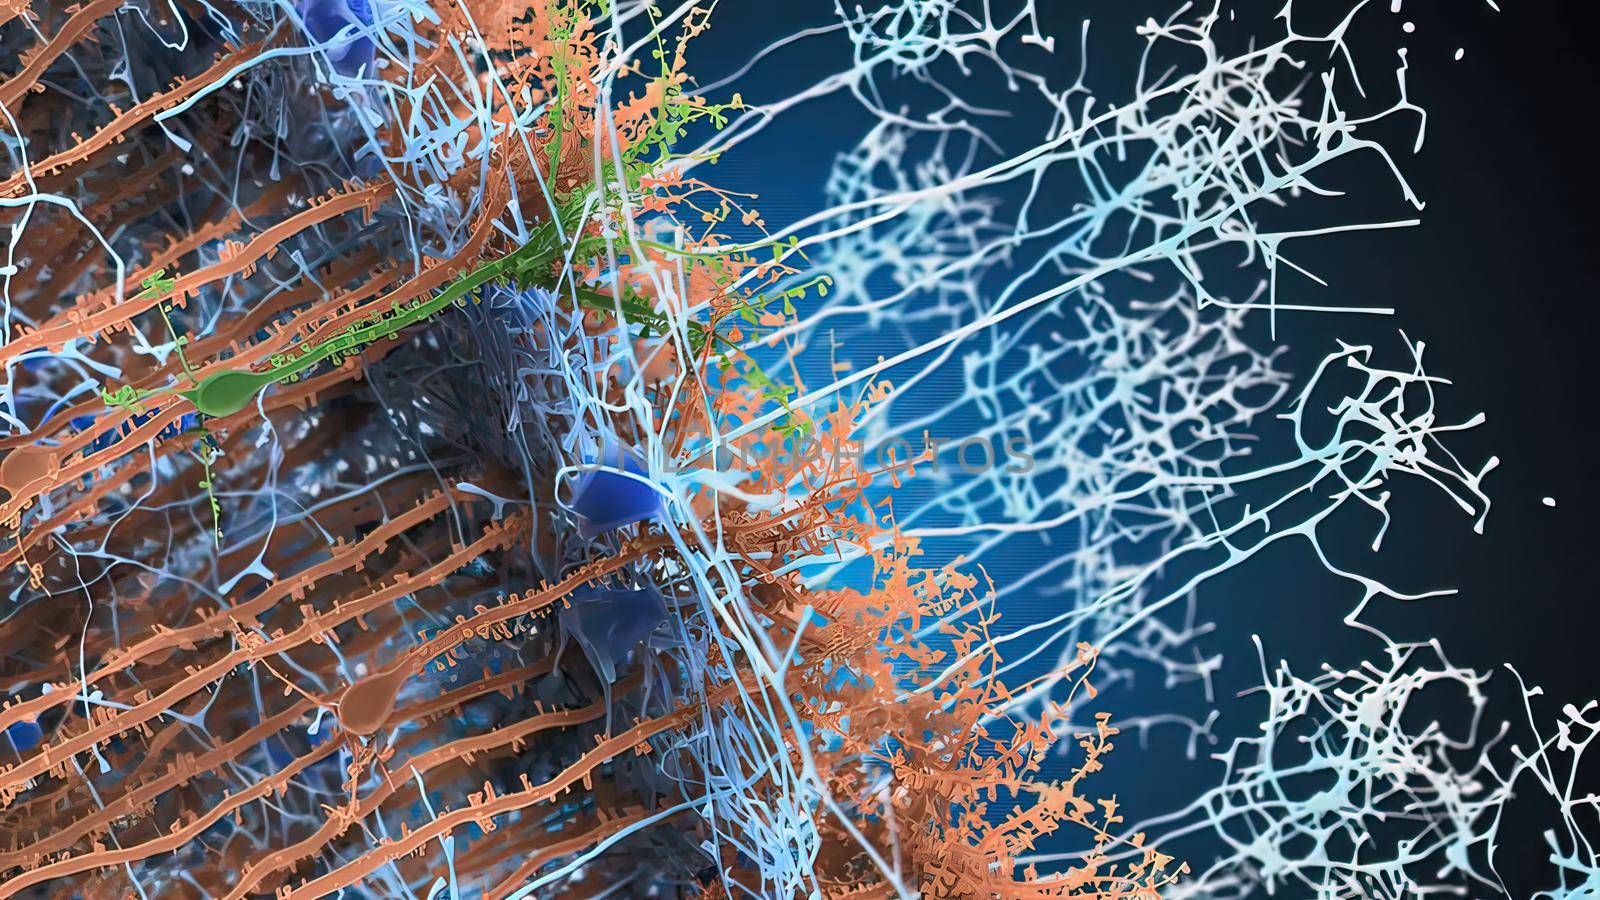 The nervous system is a complex collection of nerves and specialized cells known as neurons that transmit signals between different parts of the body. 3d illustration